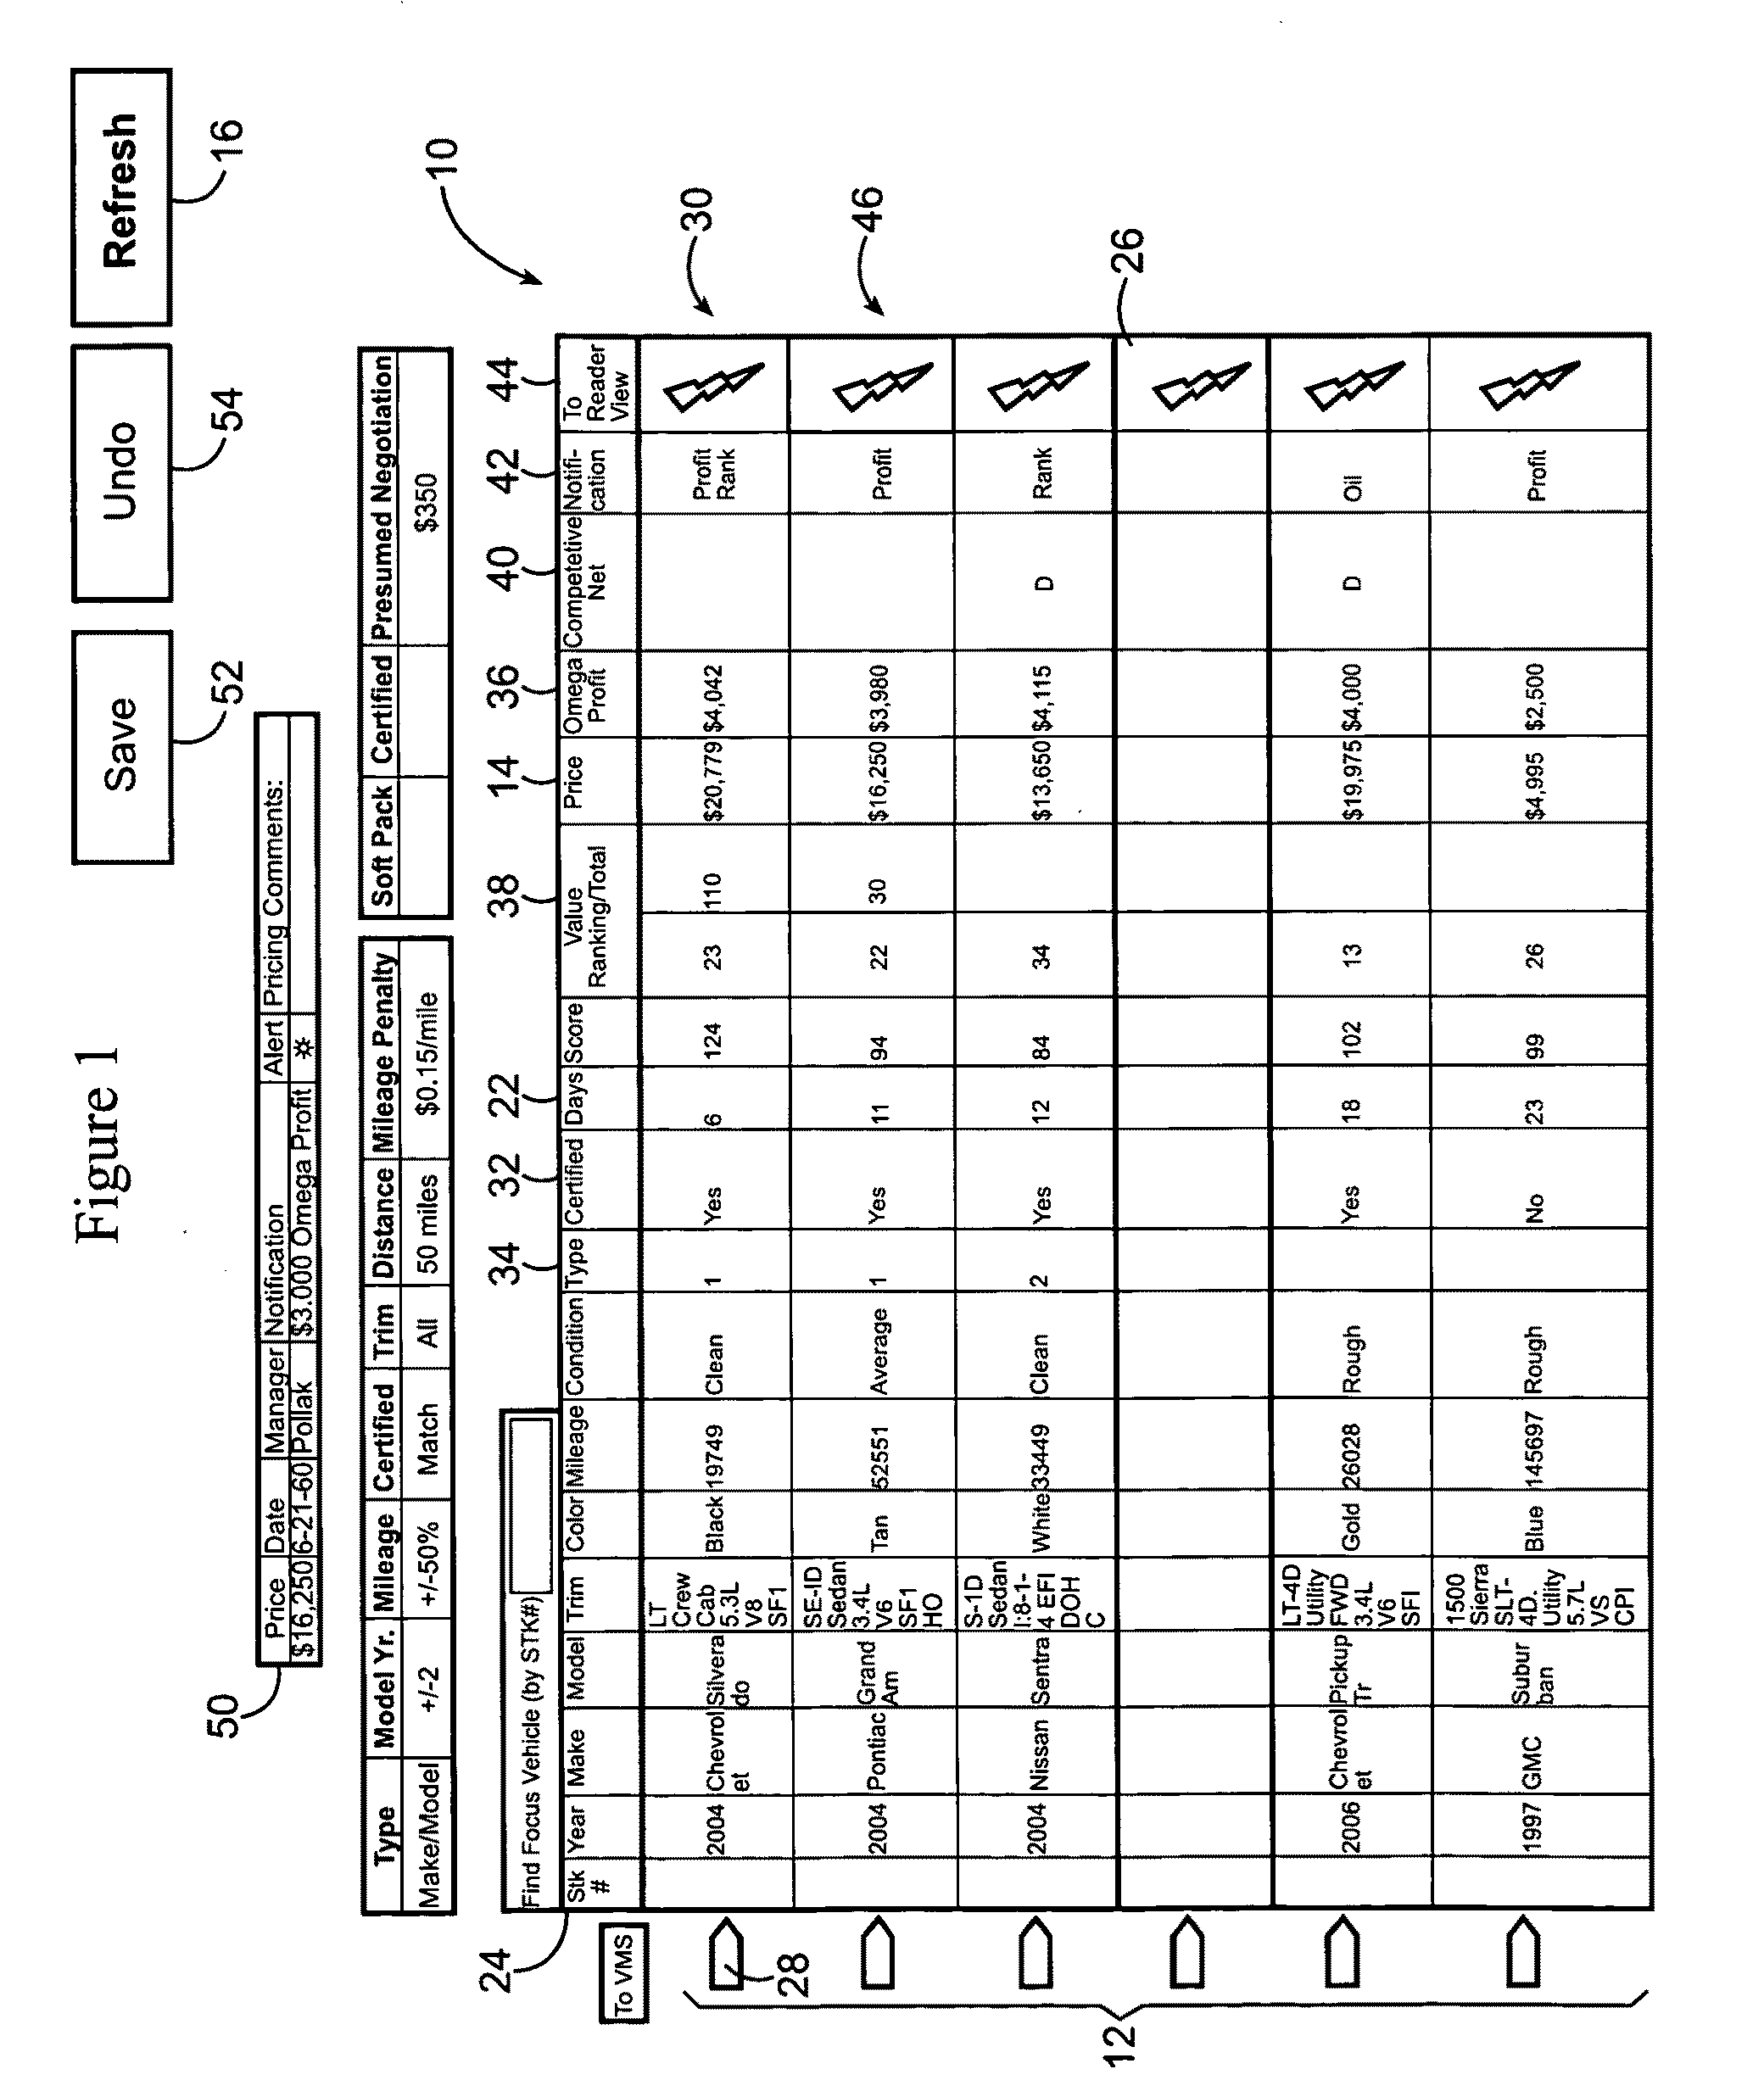 System and method for providing competitive pricing for automobiles